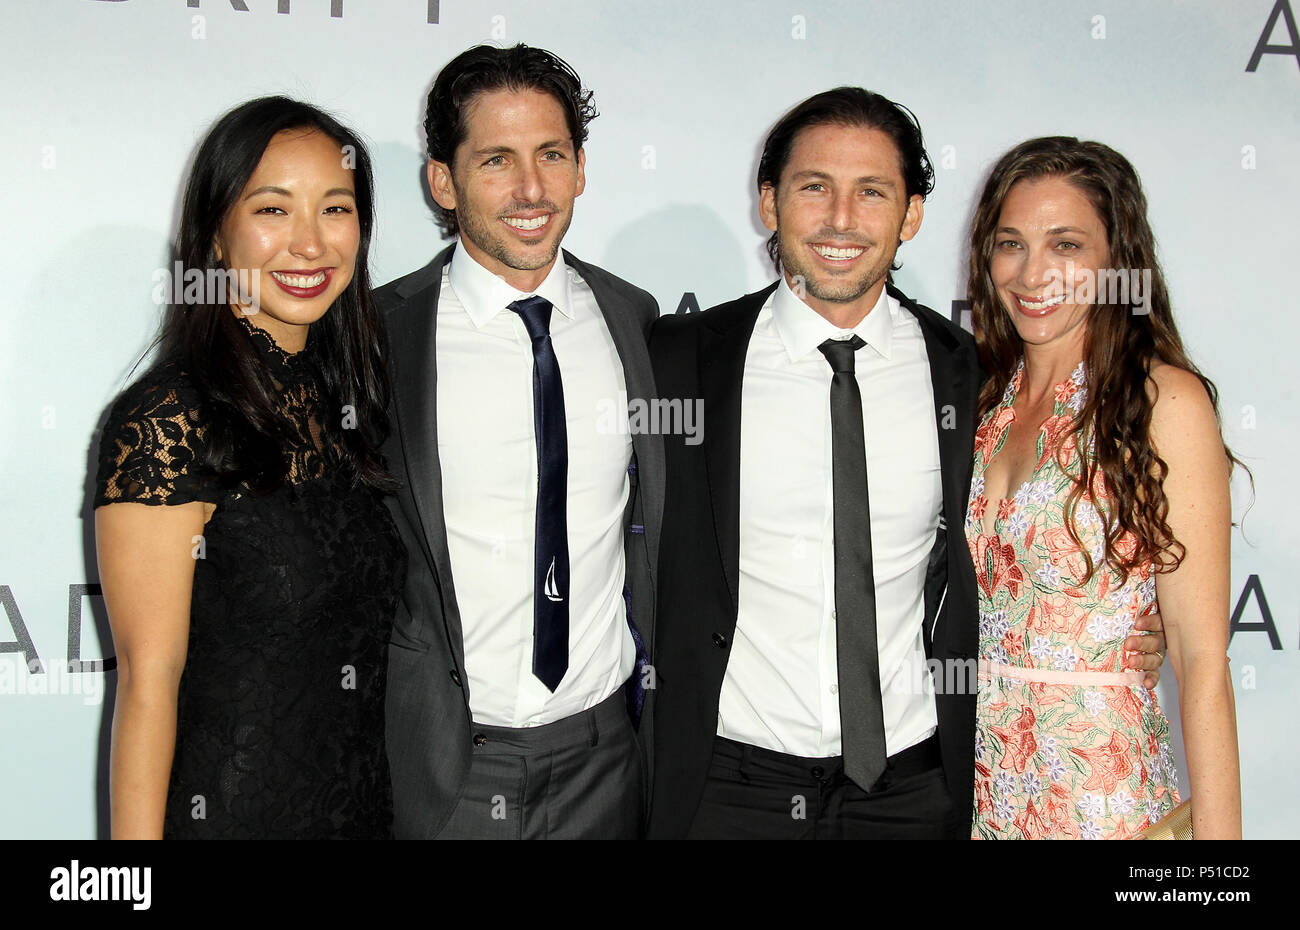 “Adrift” Los Angeles Premiere held the Regal L.A. Life Theatre in Los Angeles, California.  Featuring: Tina Kandell, Aaron Kandell, Jordan Kandell, Rebecca Kandell Where: Los Angeles, California, United States When: 24 May 2018 Credit: Adriana M. Barraza/WENN.com Stock Photo